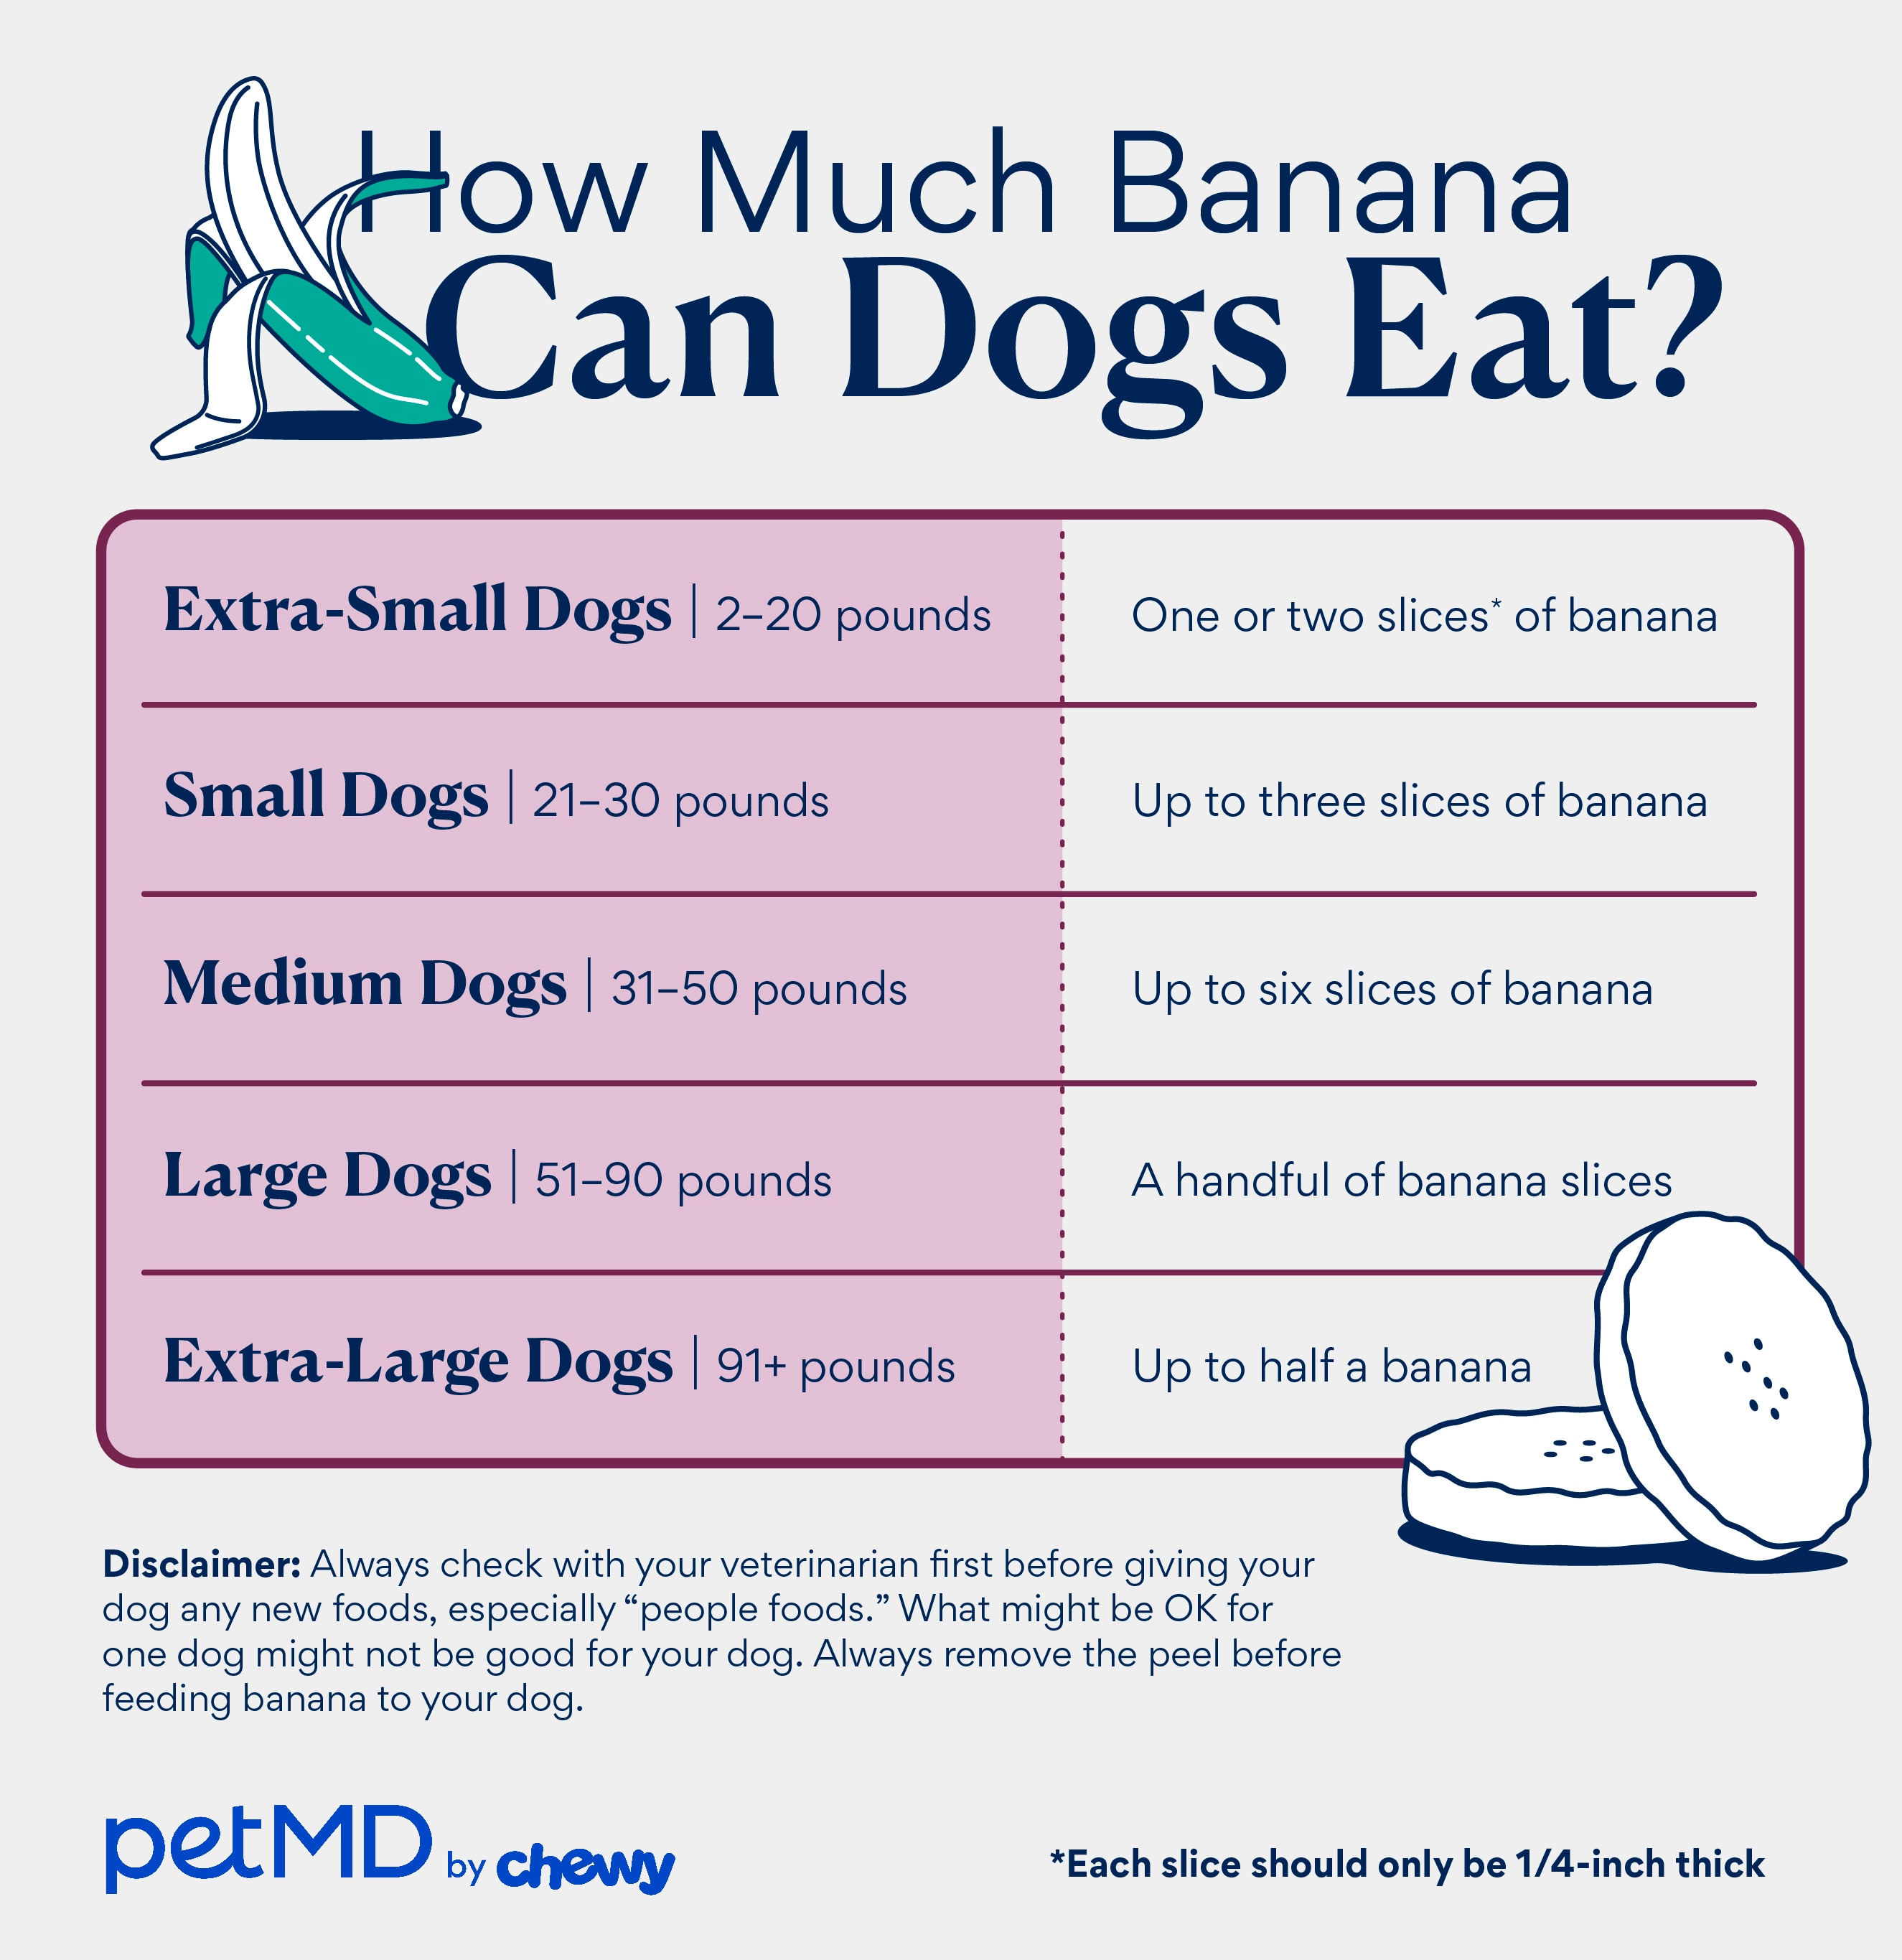 chart depicting how many bananas a dog can eat depending on their size